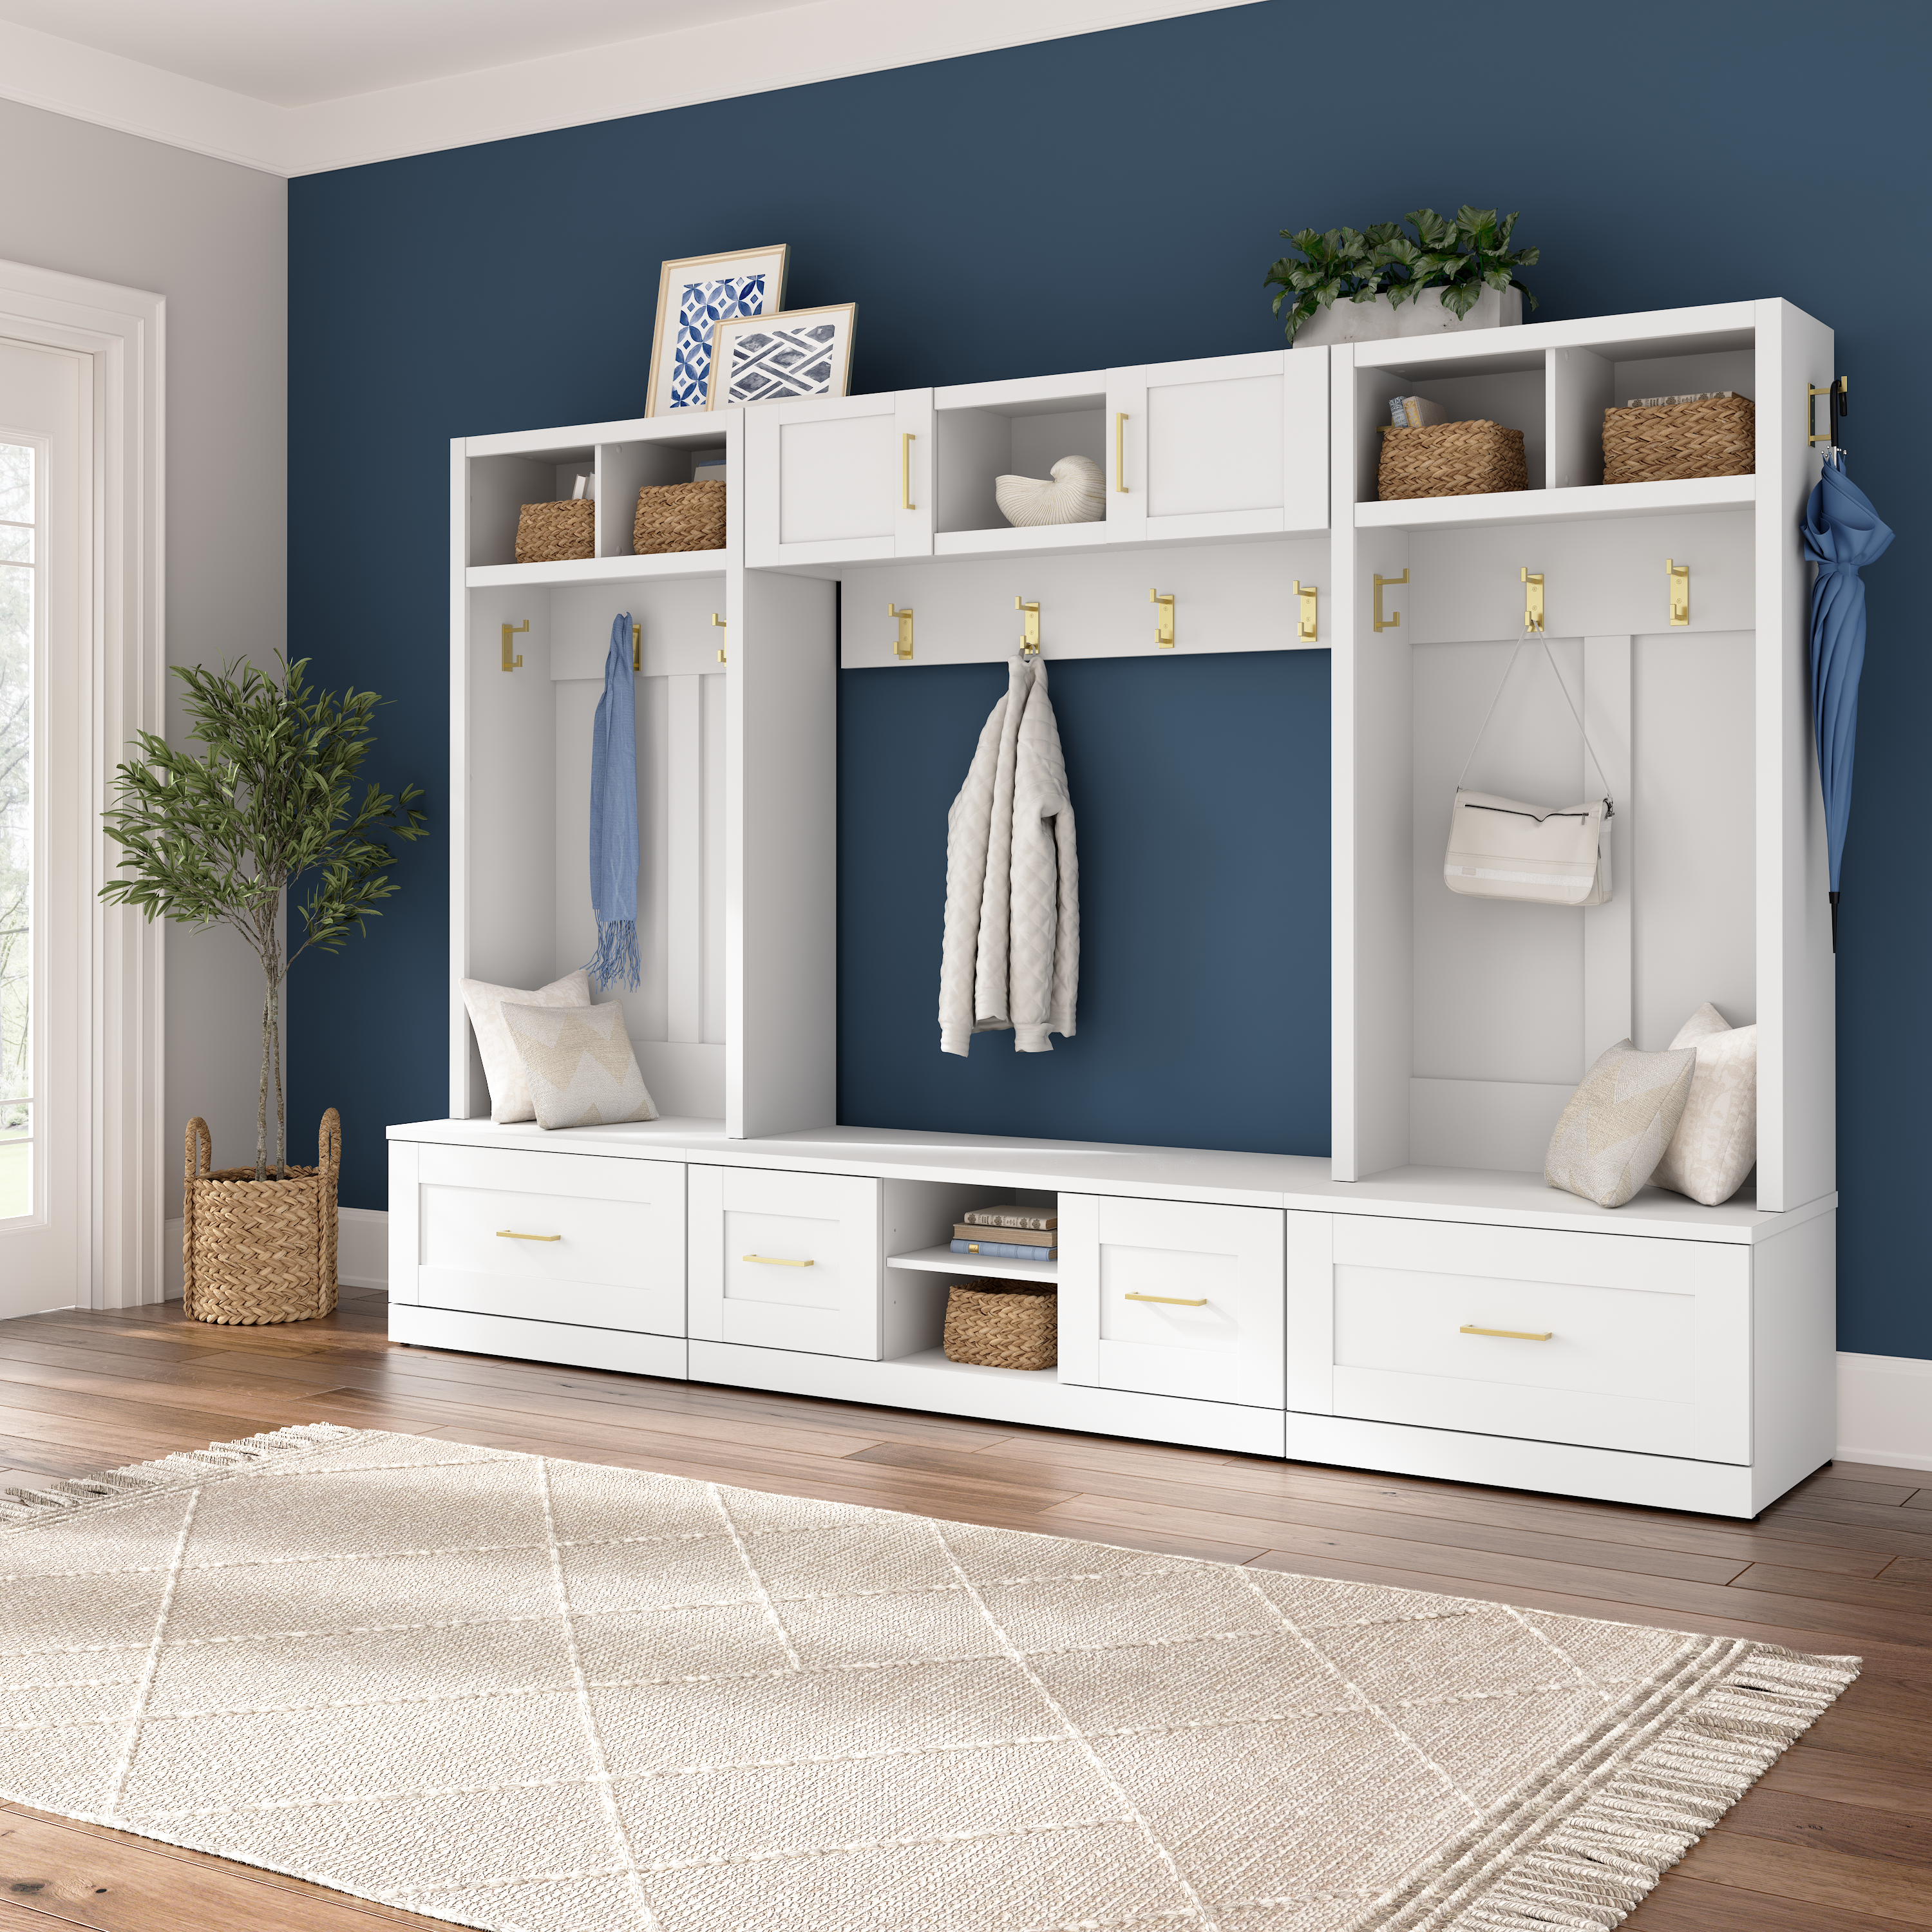 Shop Bush Furniture Hampton Heights Full Entryway Storage Set with Coat Rack, Hall Trees, and Shoe Benches with Doors and Drawers 01 HHS008WH #color_white